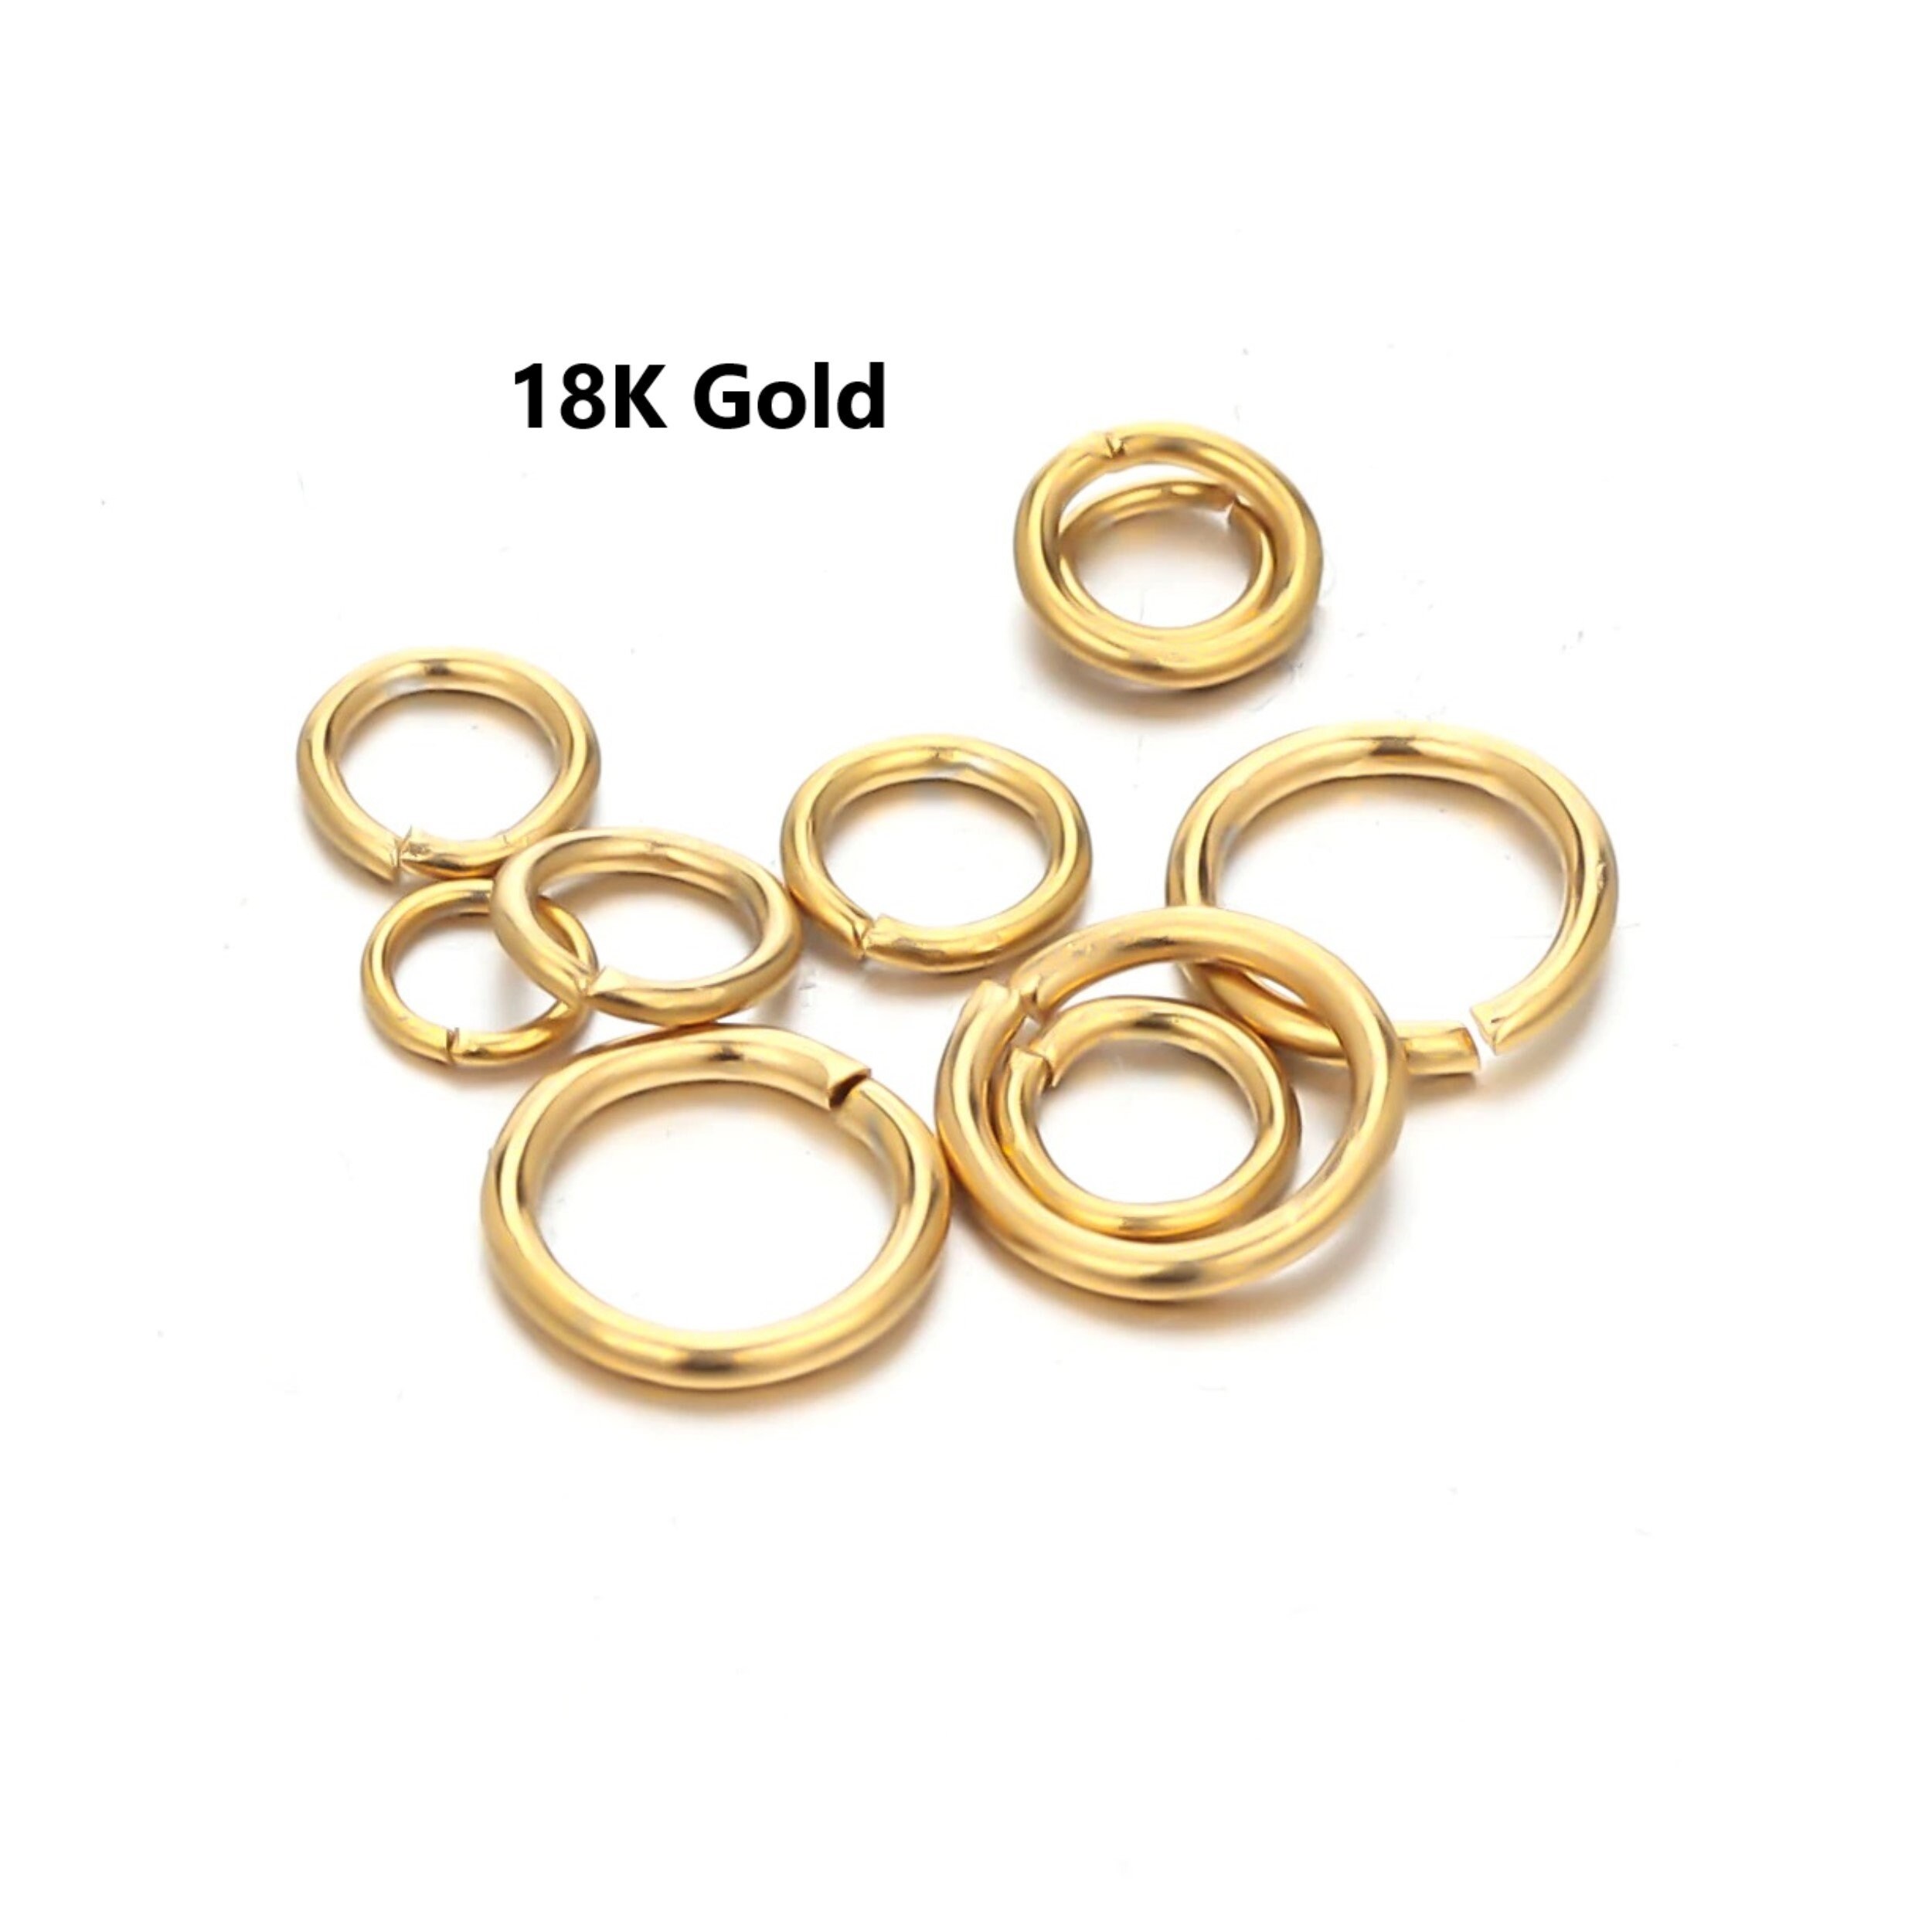 100PCS 3.5MM-10MM DIY Making Jewelry Findings Stainless Steel Jump Rings  Gold